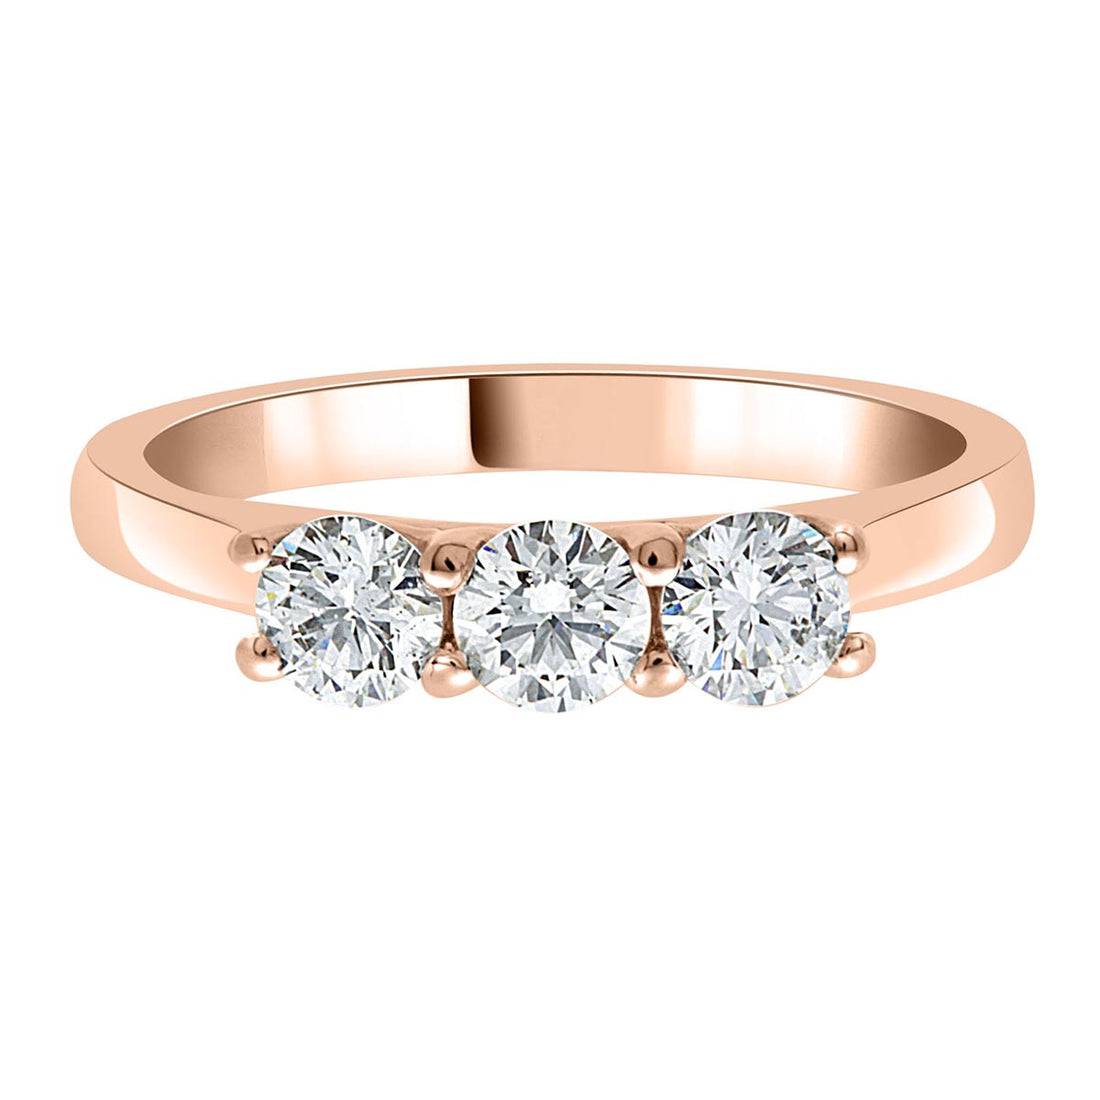 Three Stone Engagement Ring made of rose gold